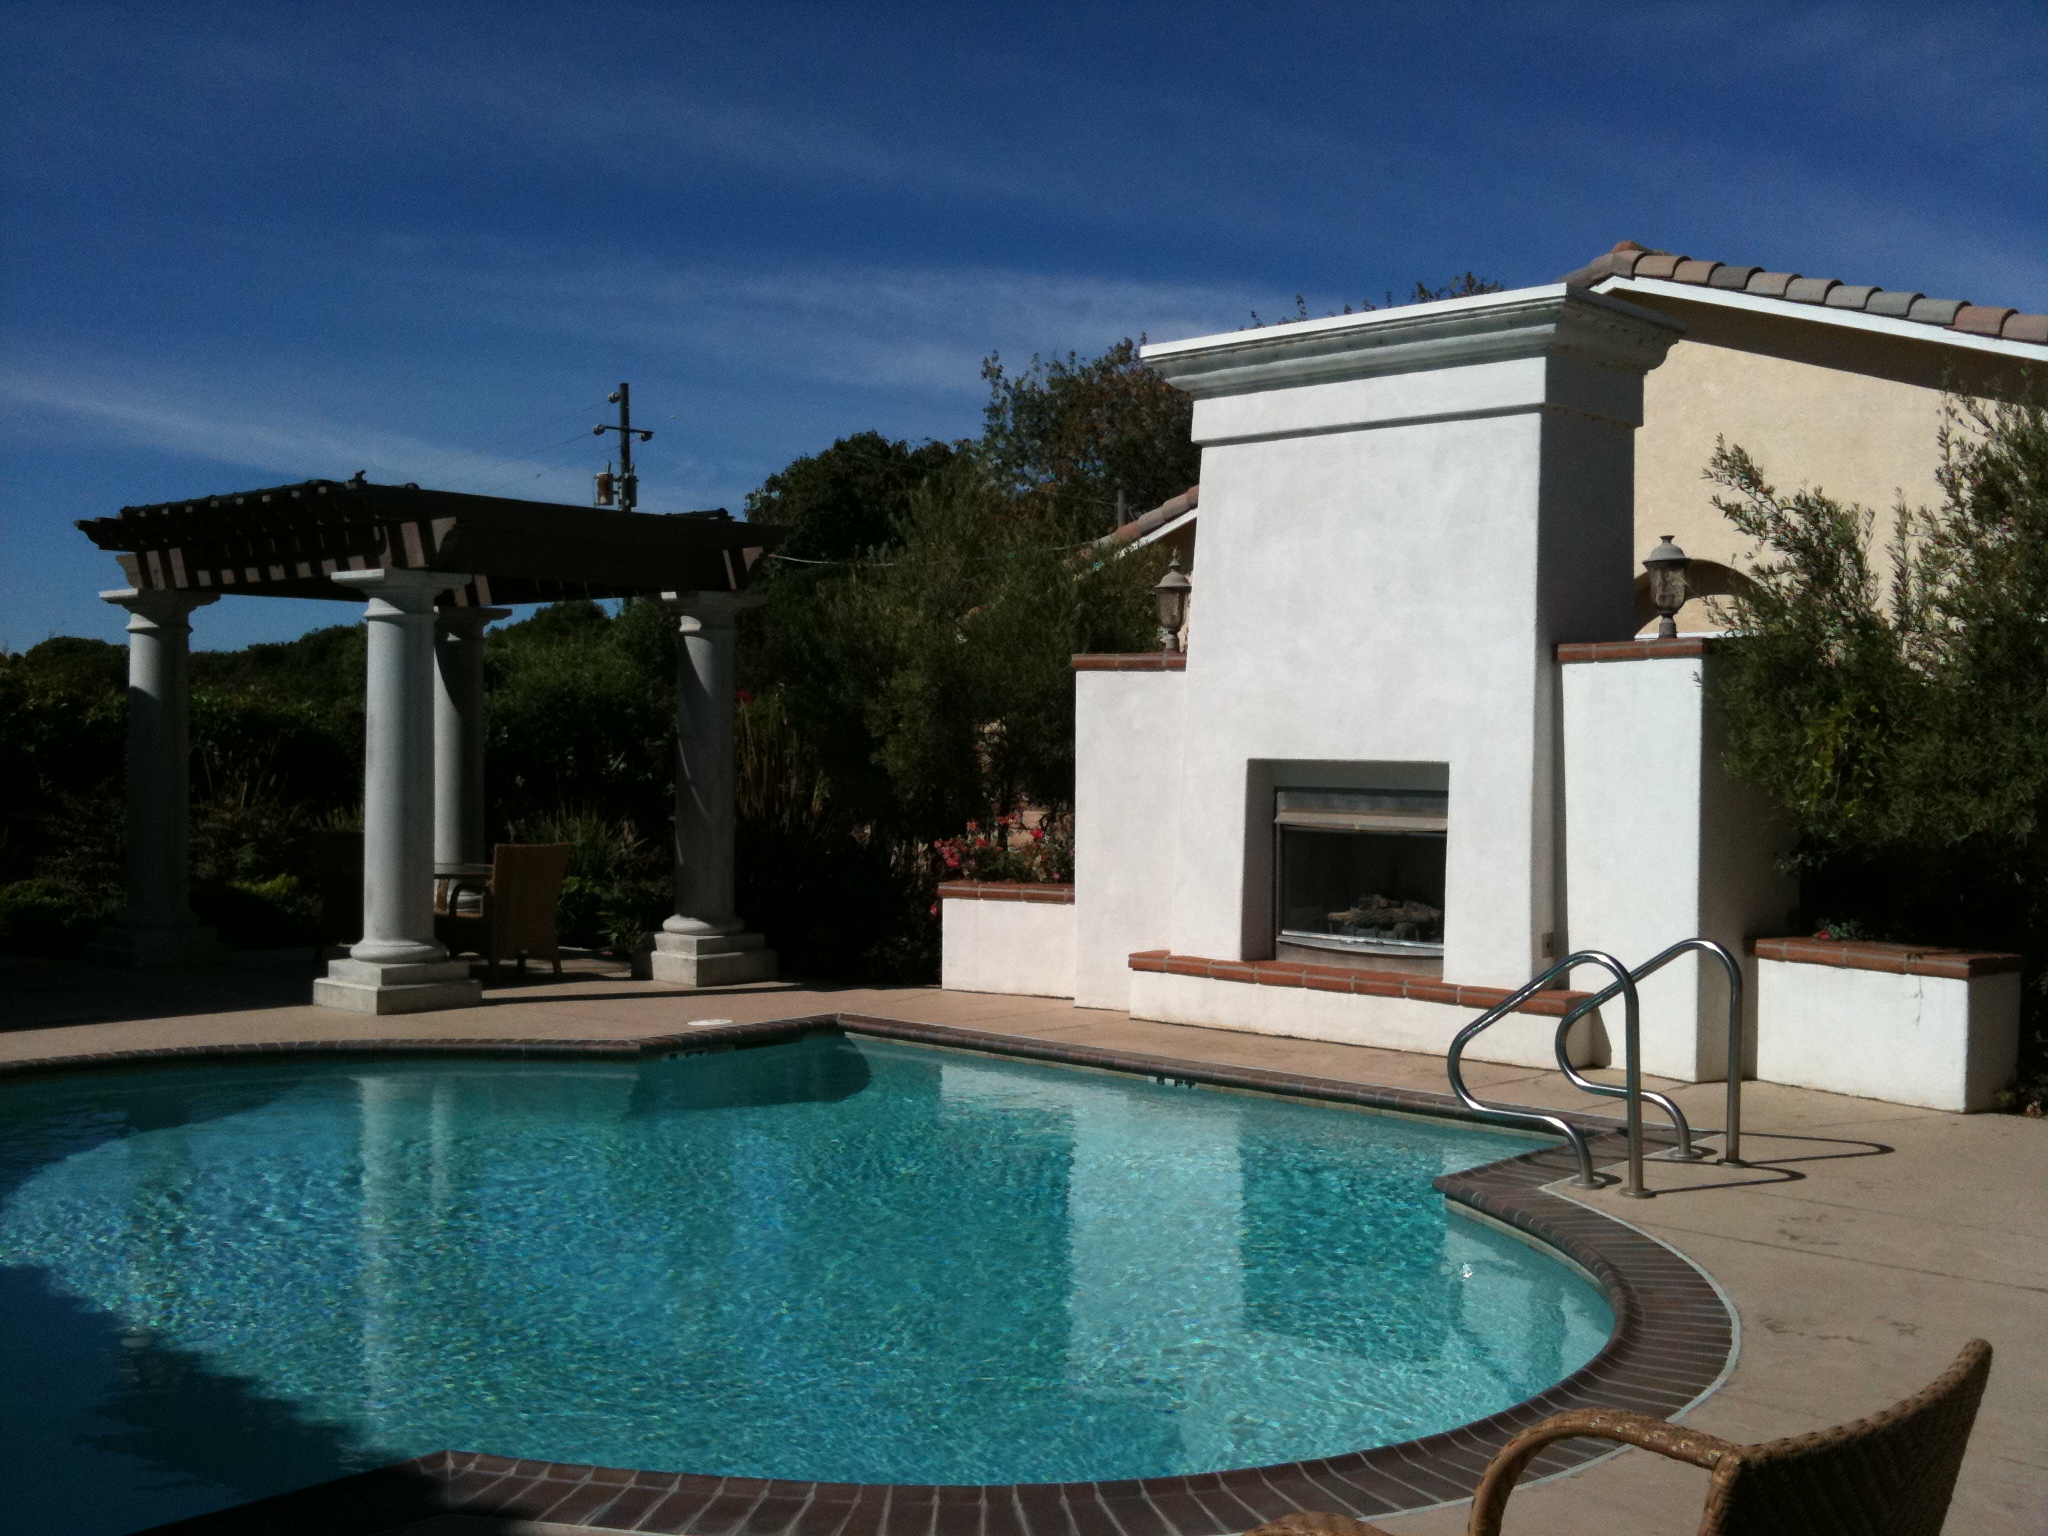 Outdoor Pool And Fireplace At La Ventana Clubhouse